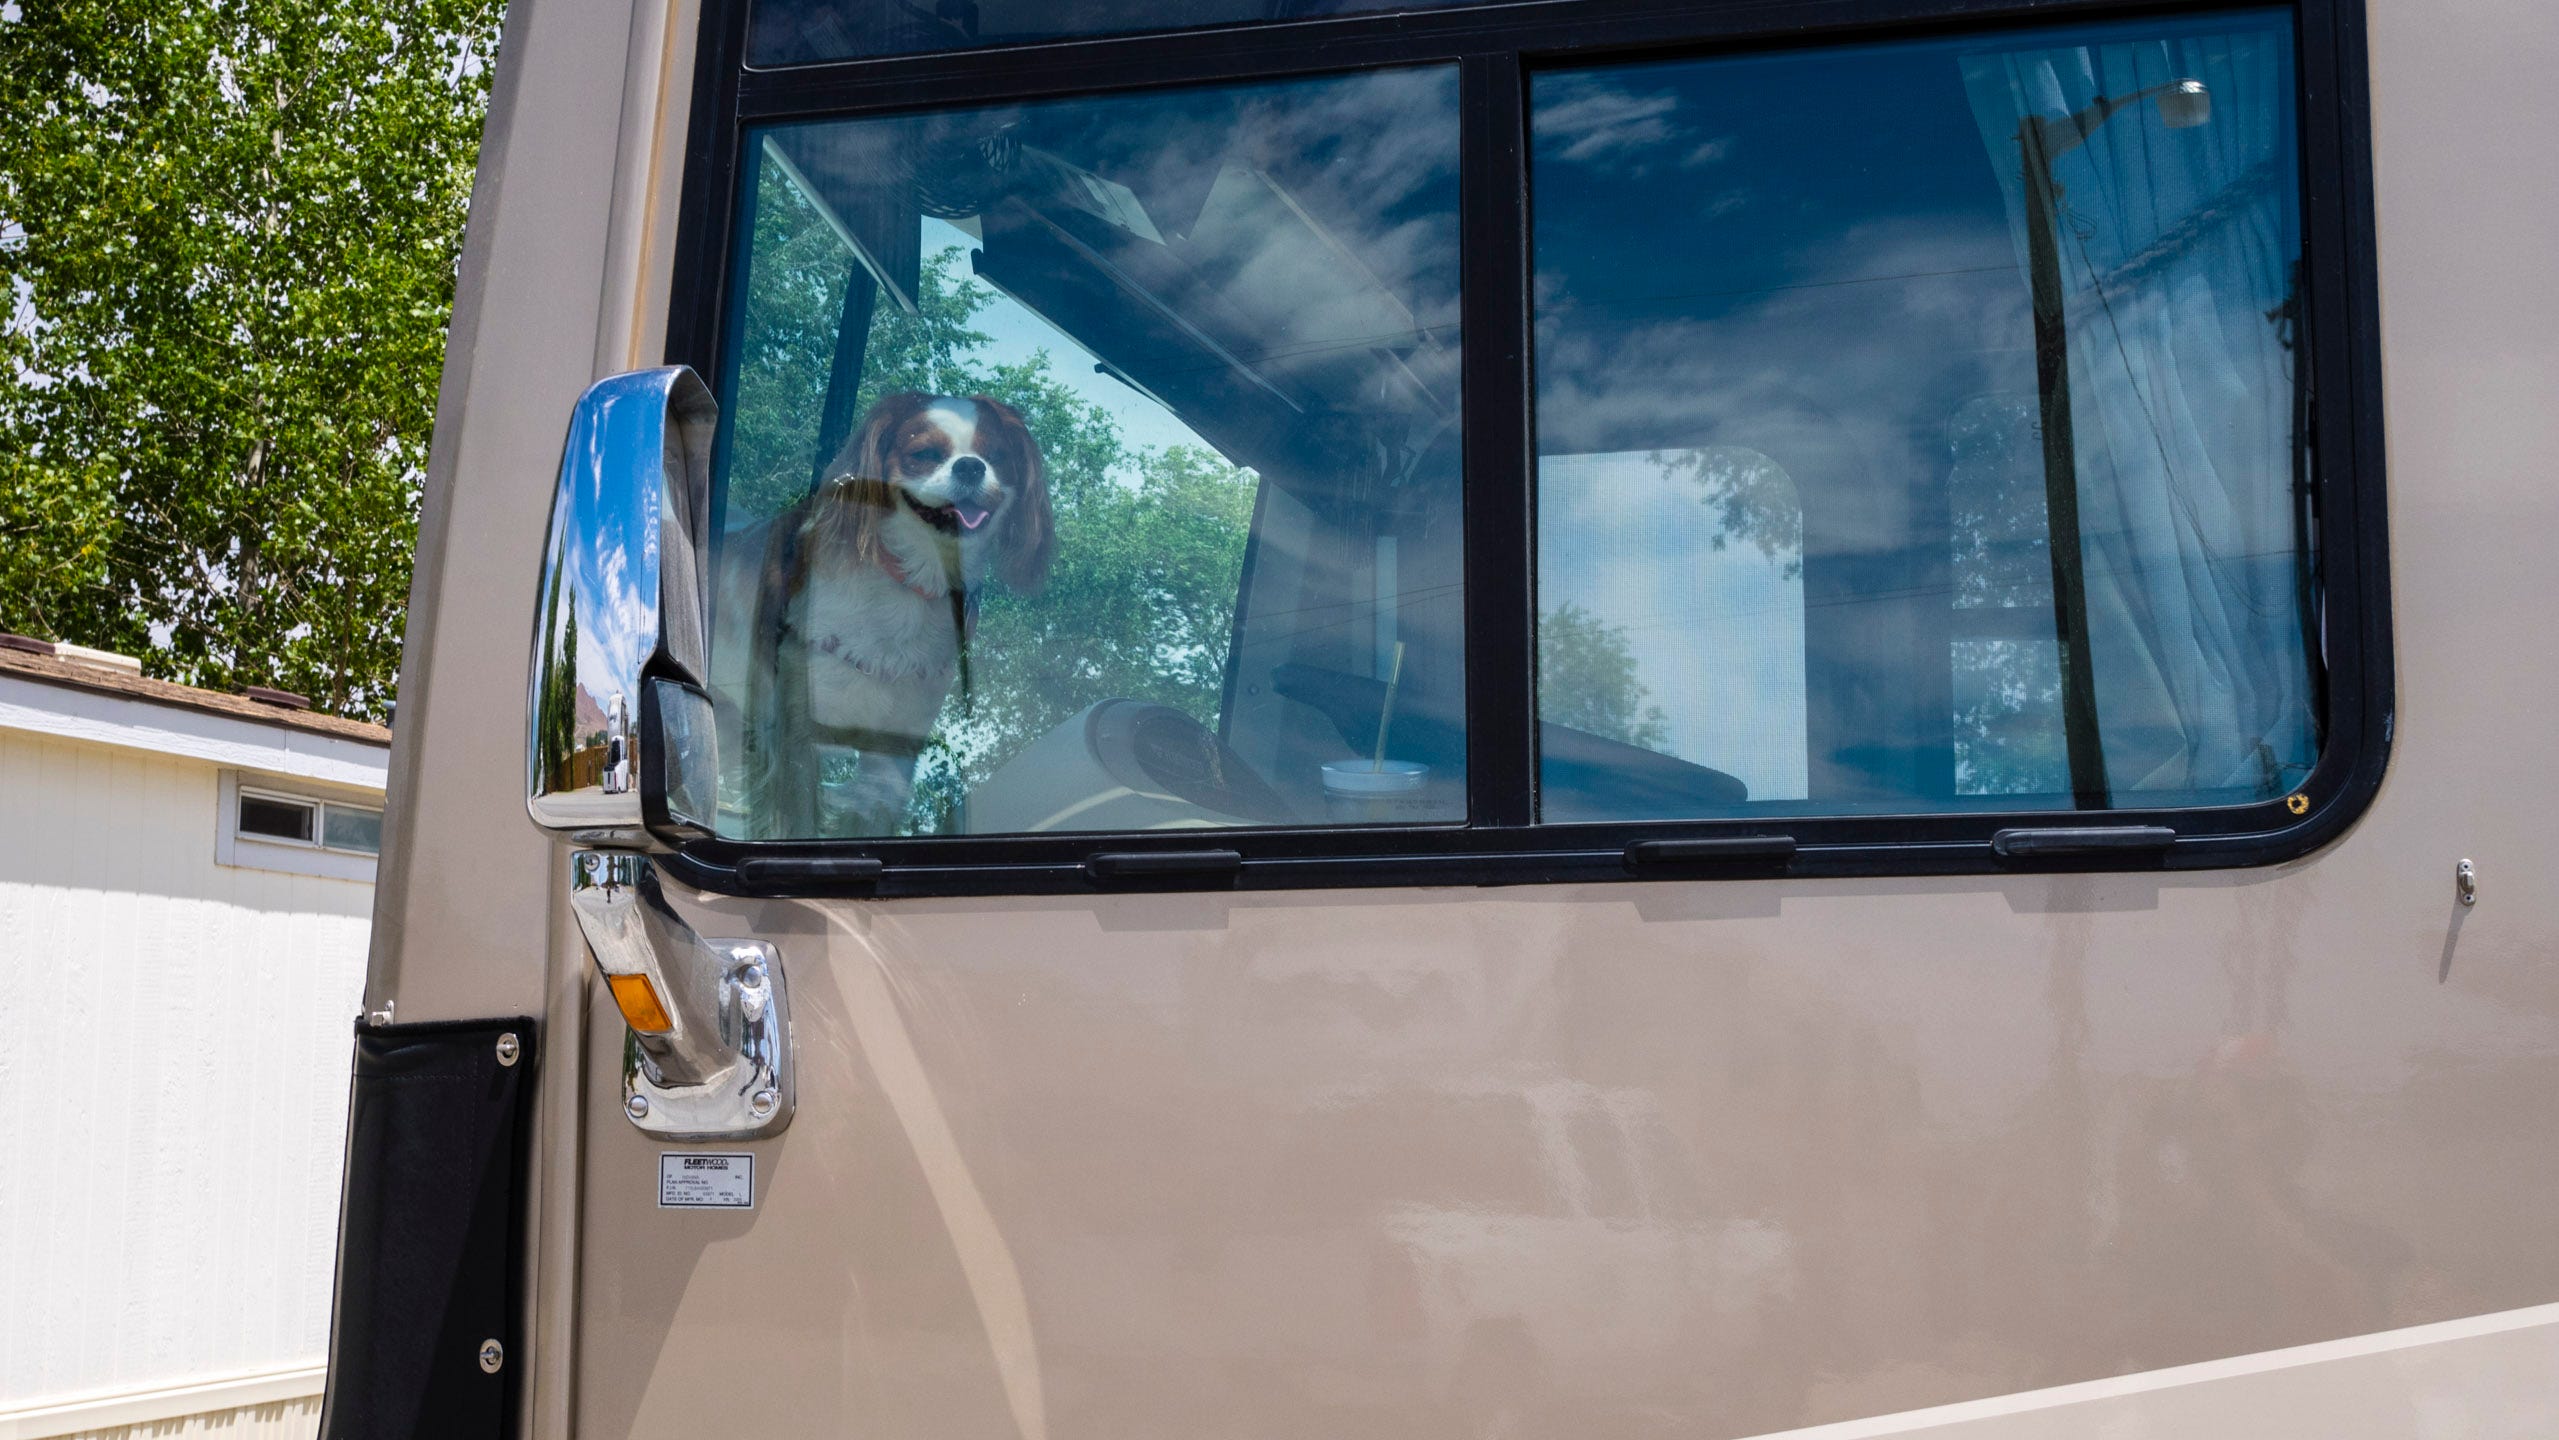 Photo of the front drivers side of a large RV. The front of the RV is nearly vertical, like a bus, and there is no driver's side door. The RV is sand colored and there is a large chrome rear view mirror. Inside the RV, part of the driver's seat, steering wheel, and dashboard can be seen through a flat glass sliding window. Standing upon the dashboard inside the RV is a small dog, white with brown patches and with long floppy ears. The dog is looking outward towards the camera. His mouth is partially open, resembling a wan smile.